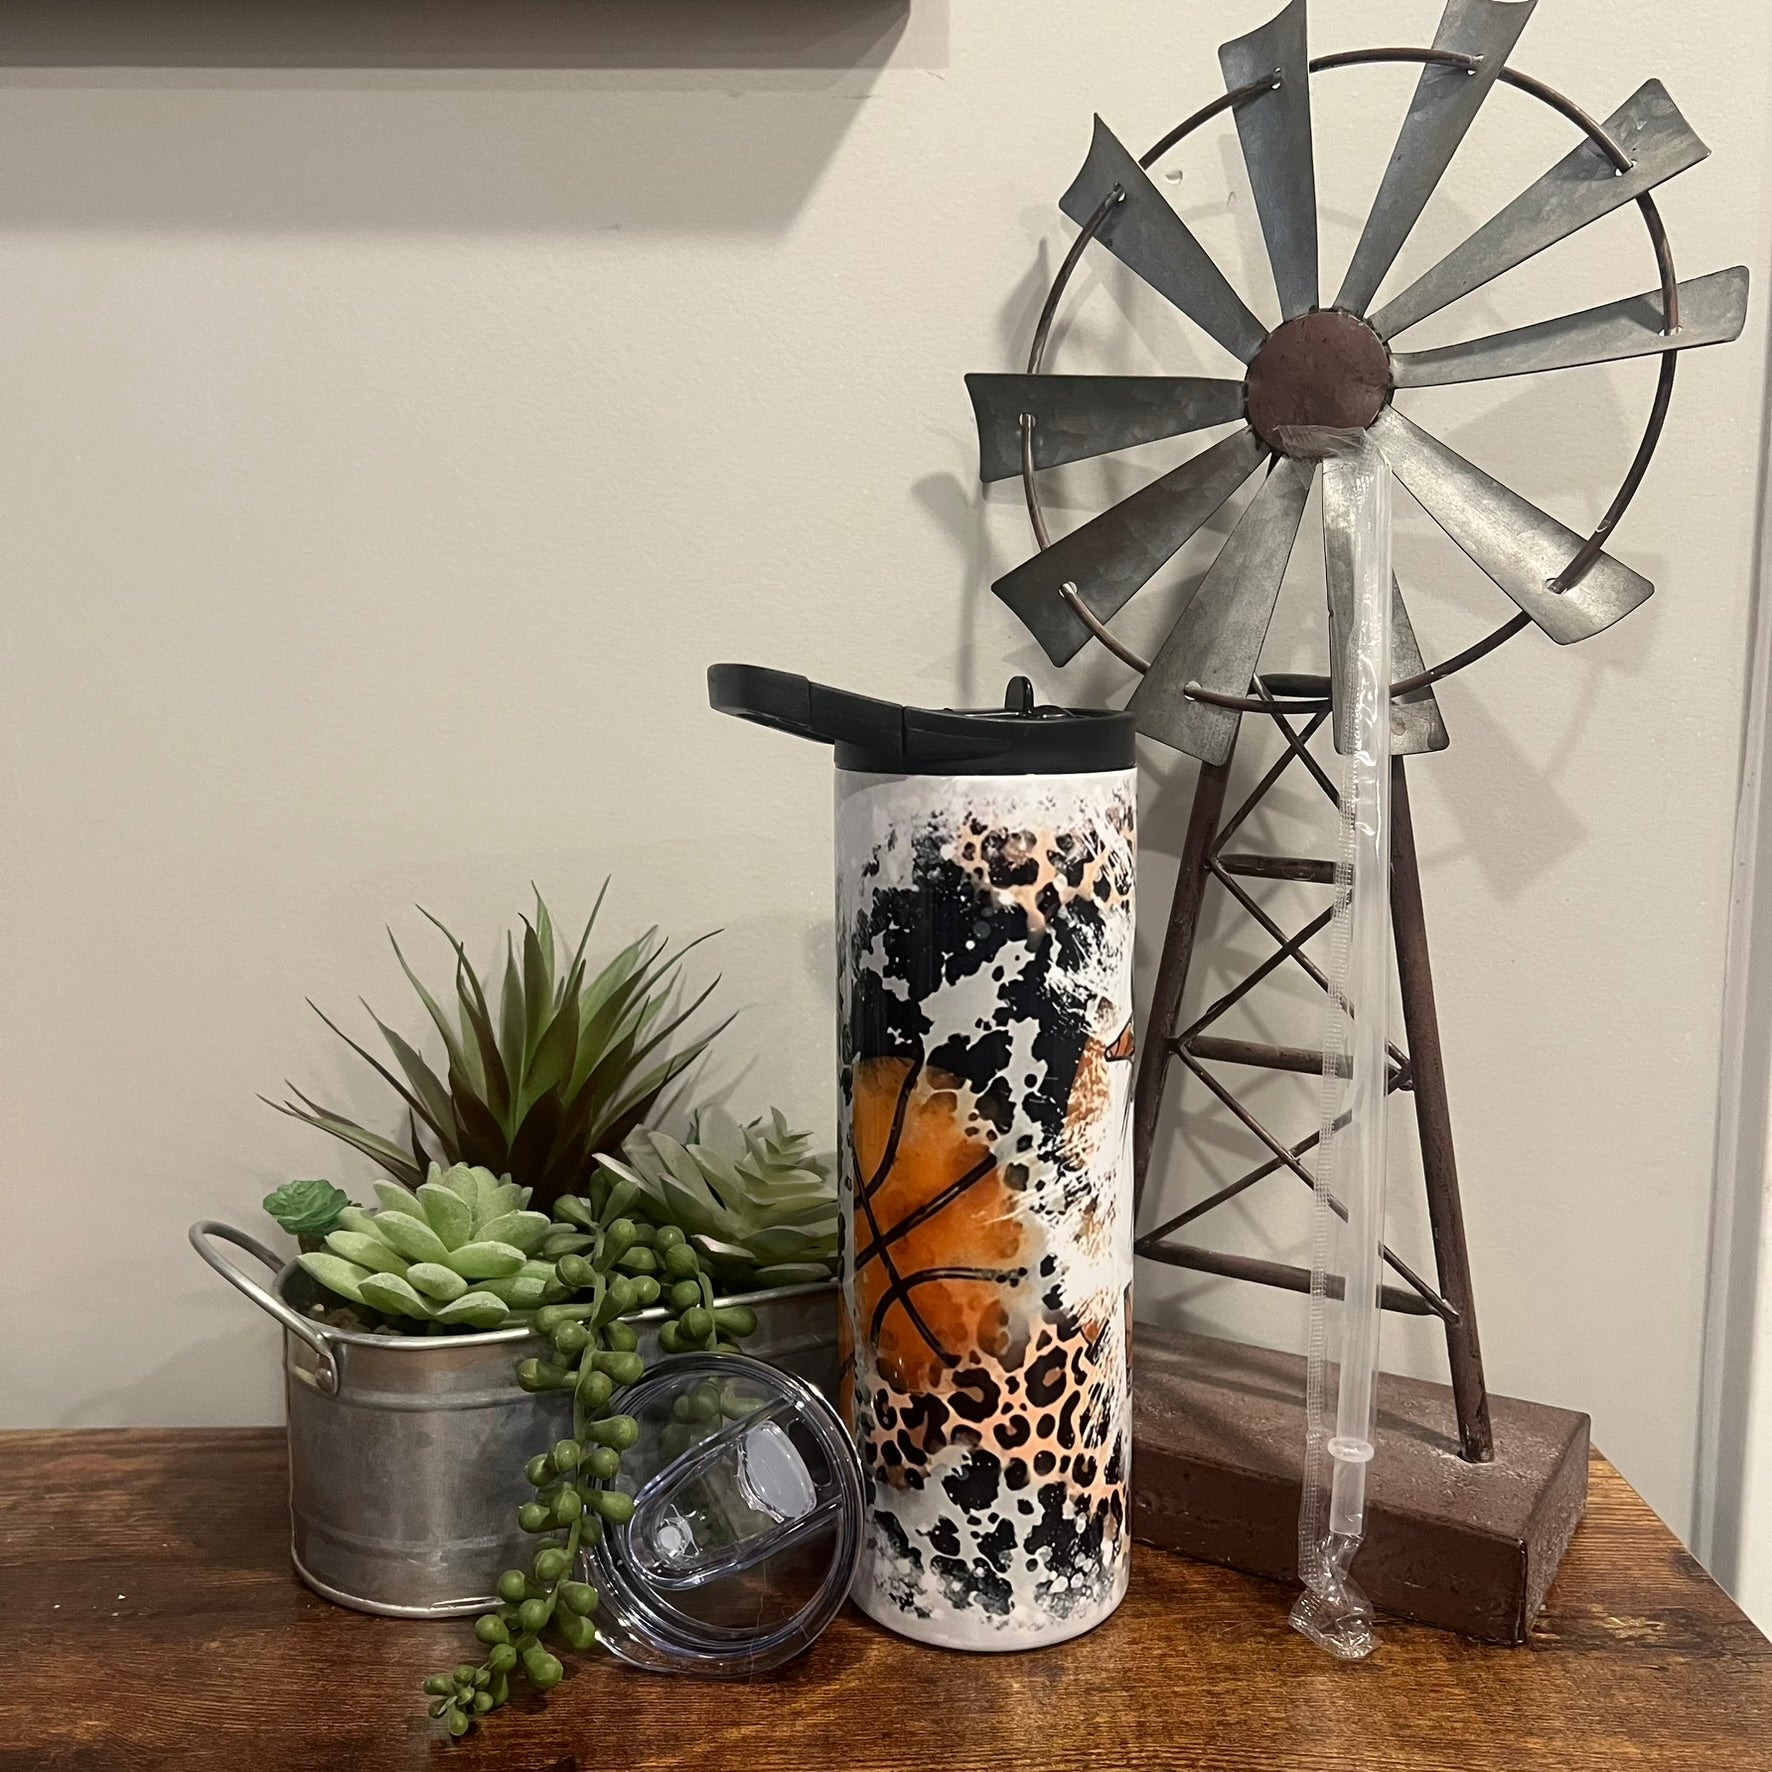 Basketball Mom design sublimation tumbler by JAC'D Cup